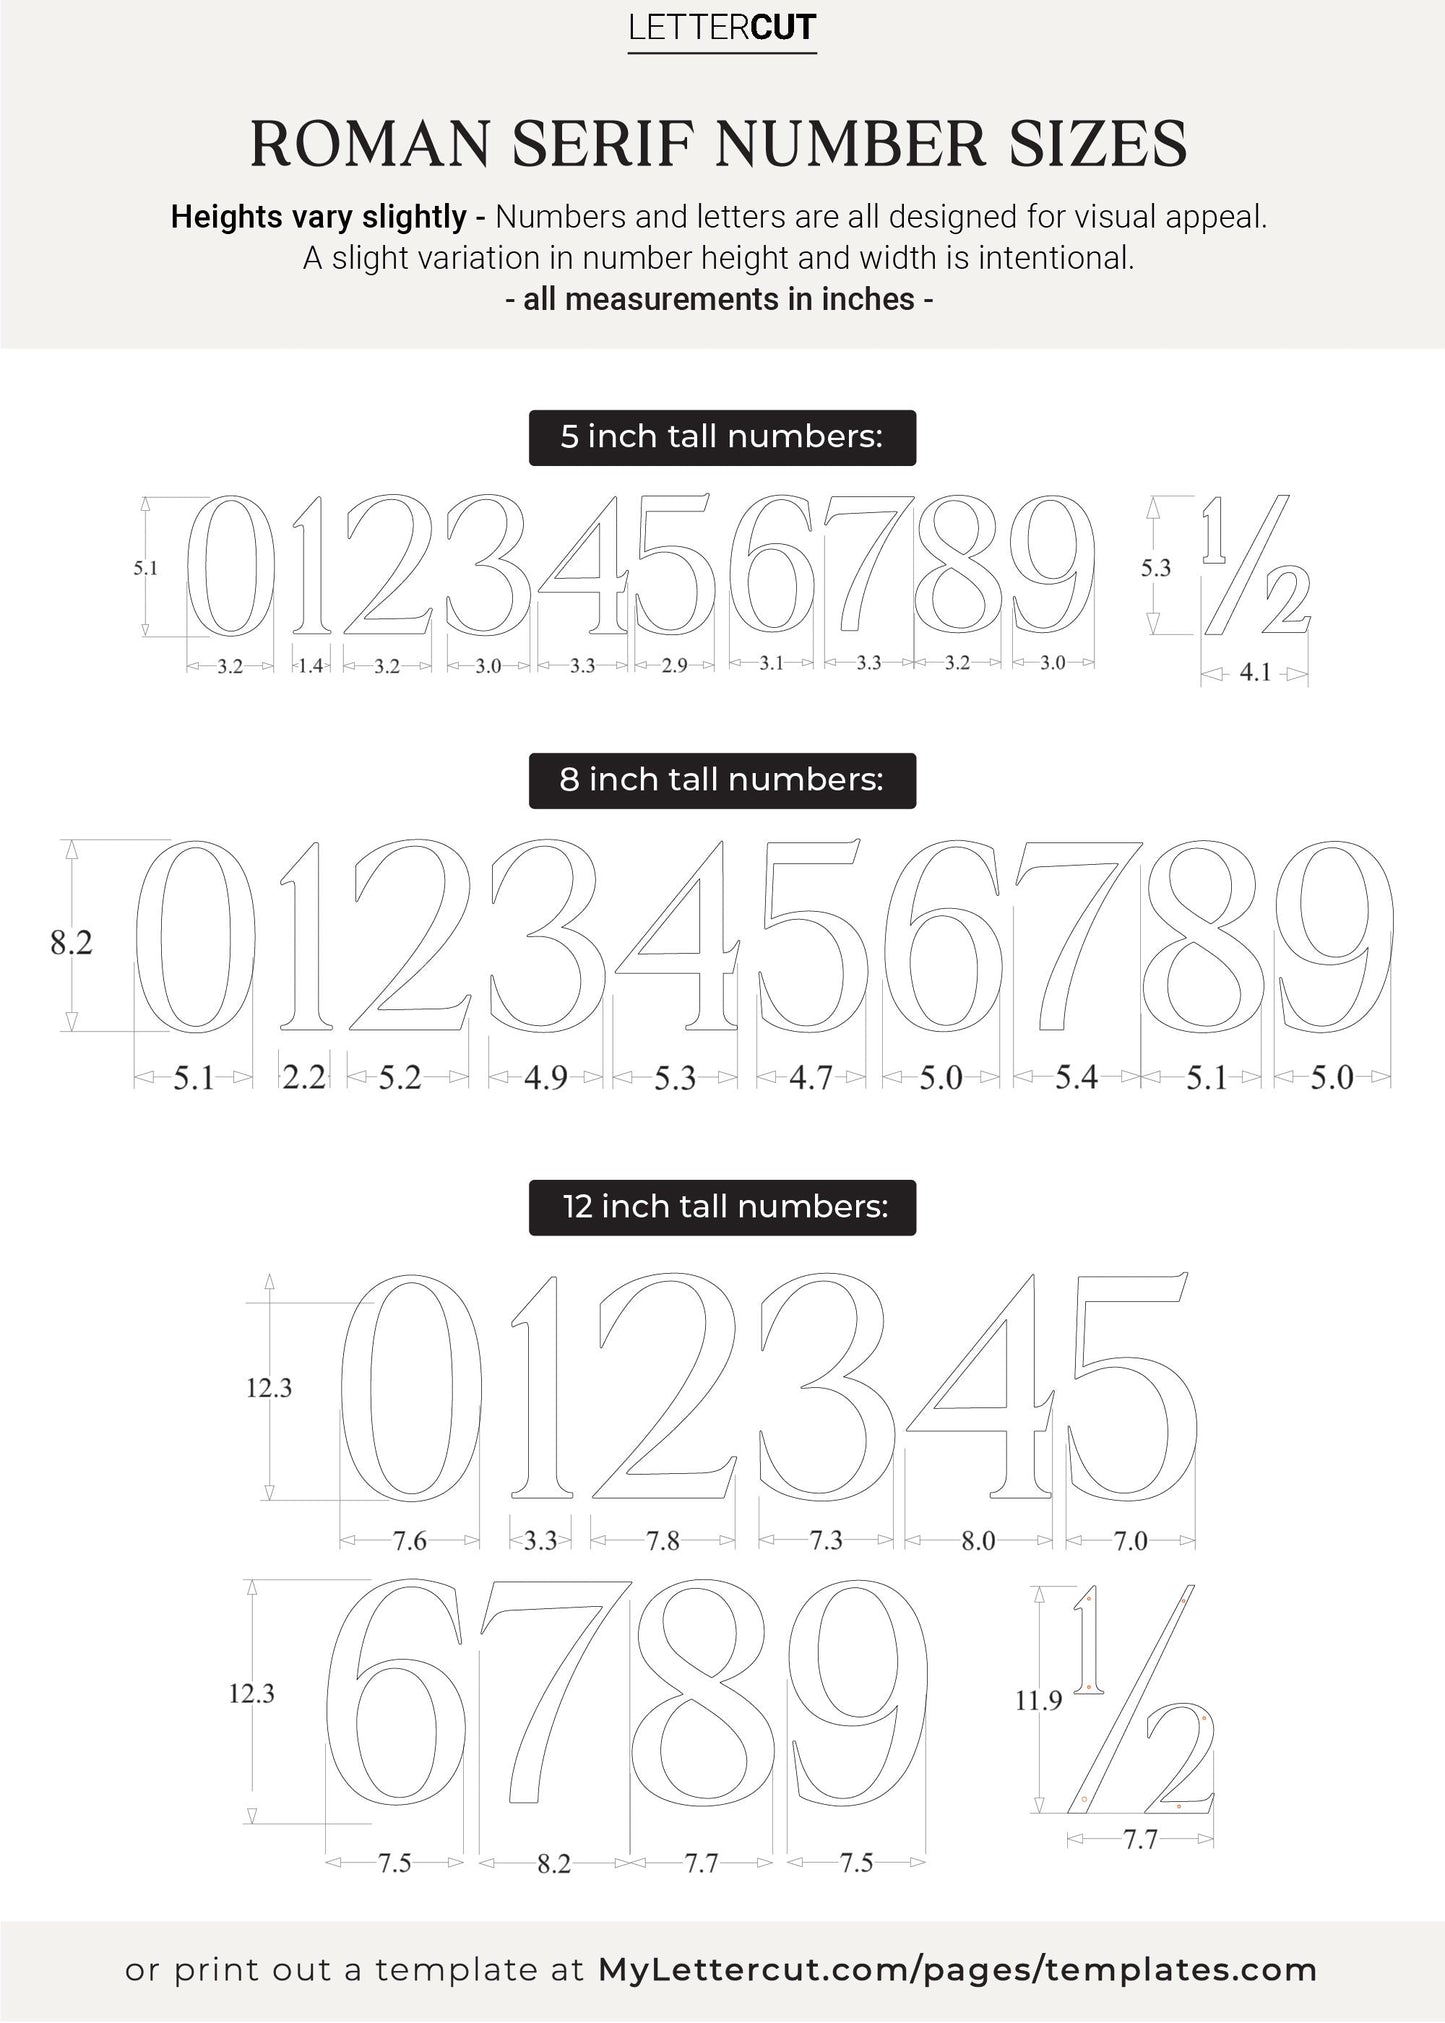 ROMAN SERIF house number sizes and measurments